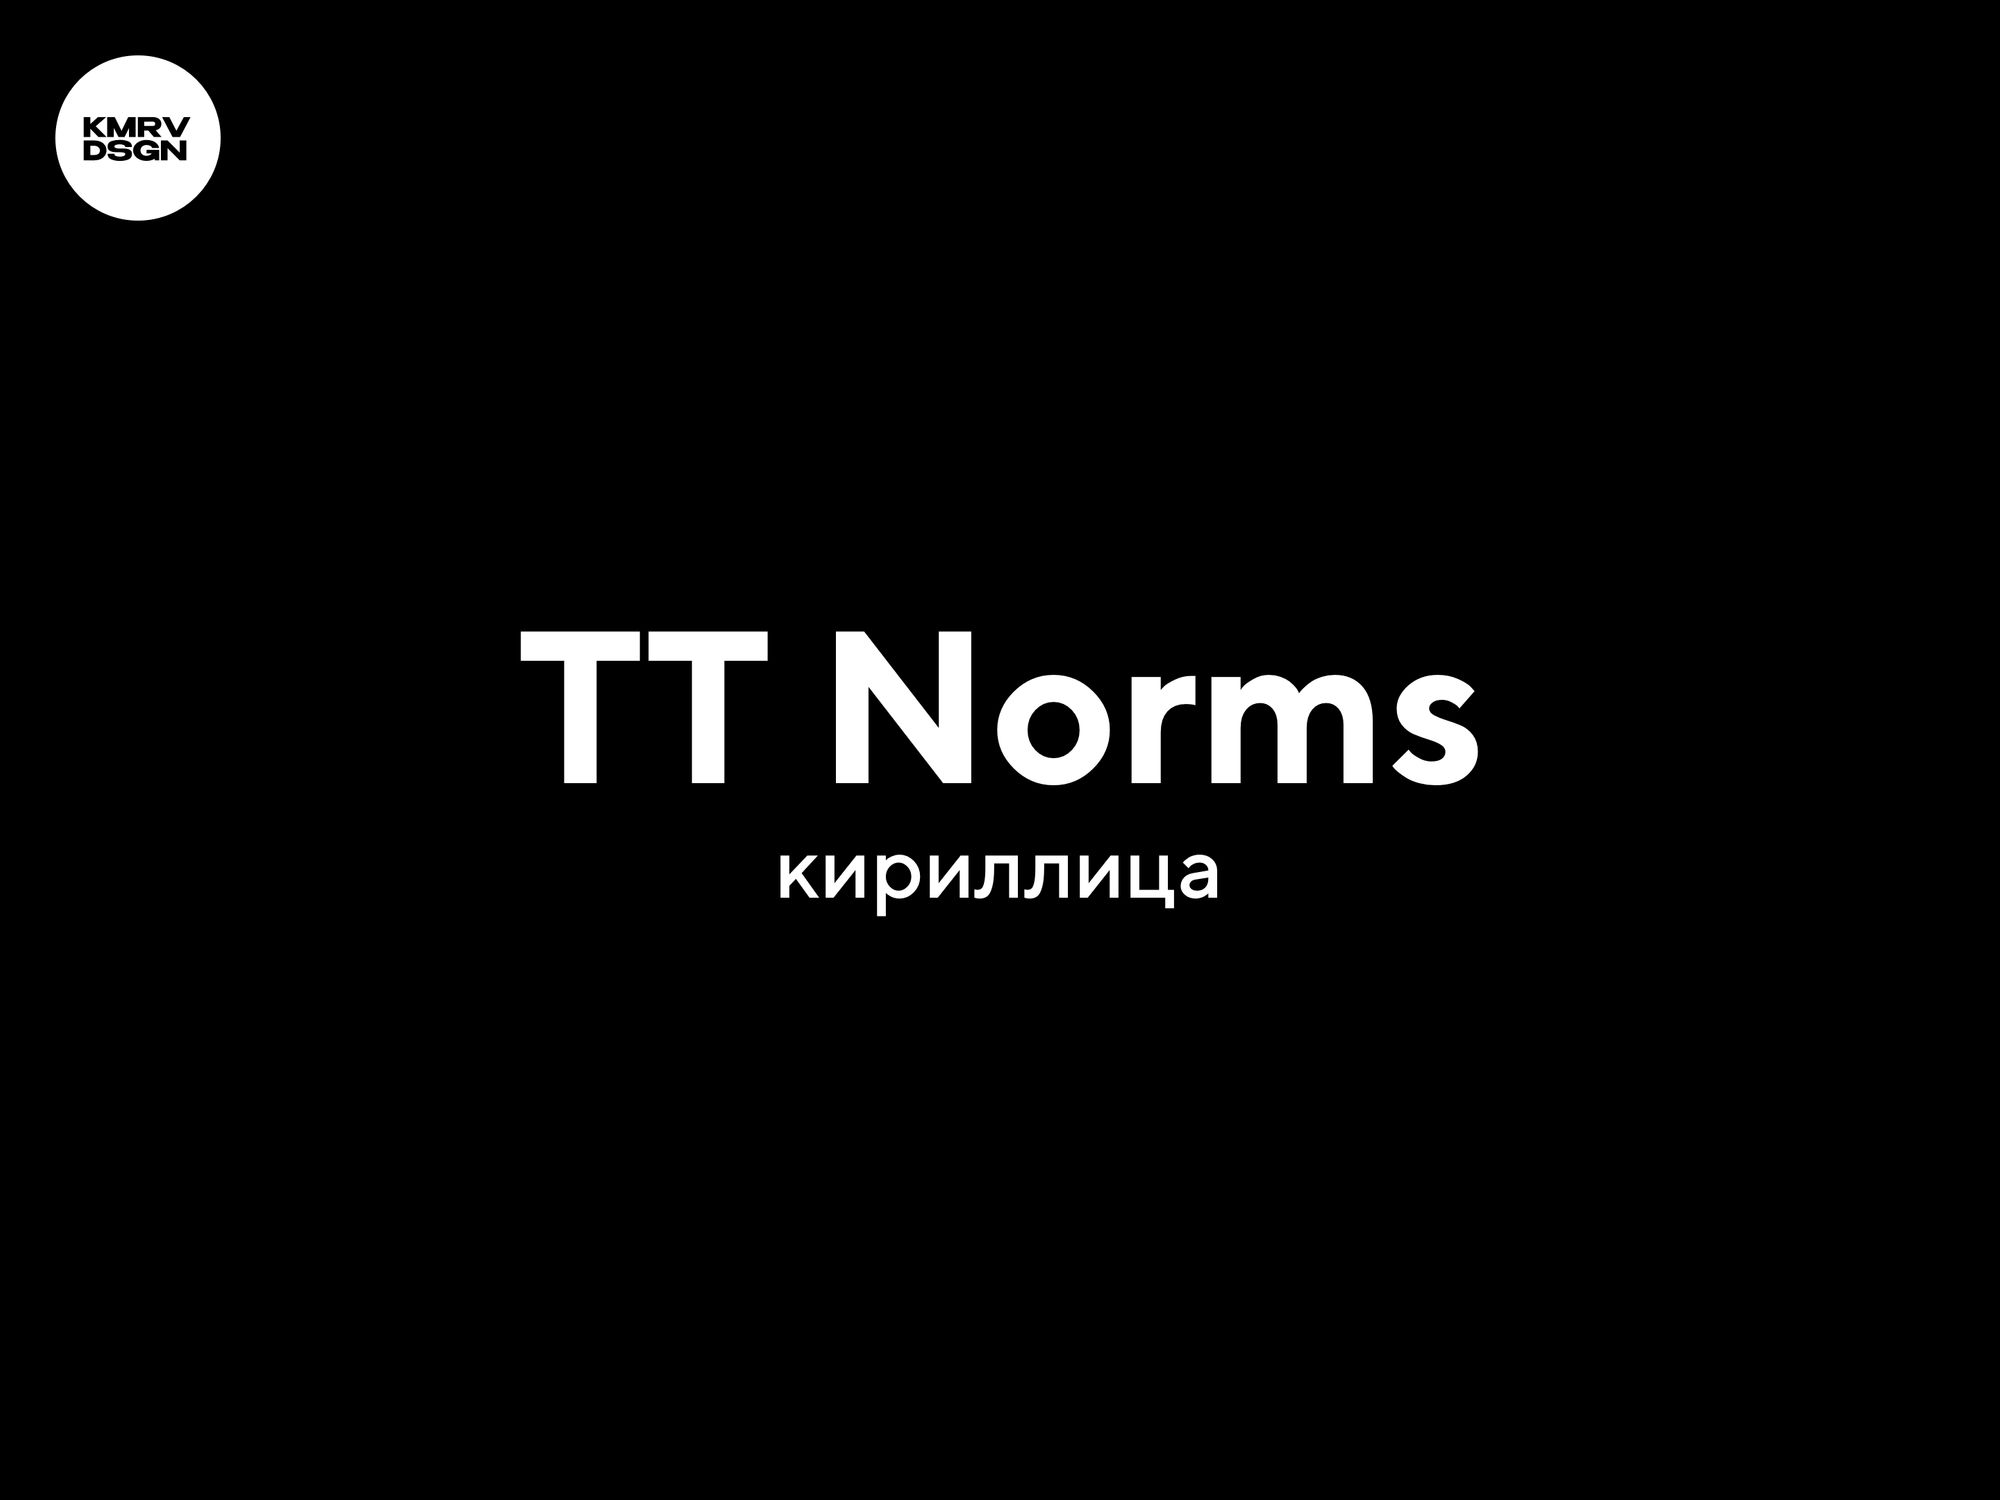 Шрифт tt norms pro. TT Norms Pro. Шрифт TT. Шрифт Norms. TT Norms Regular.